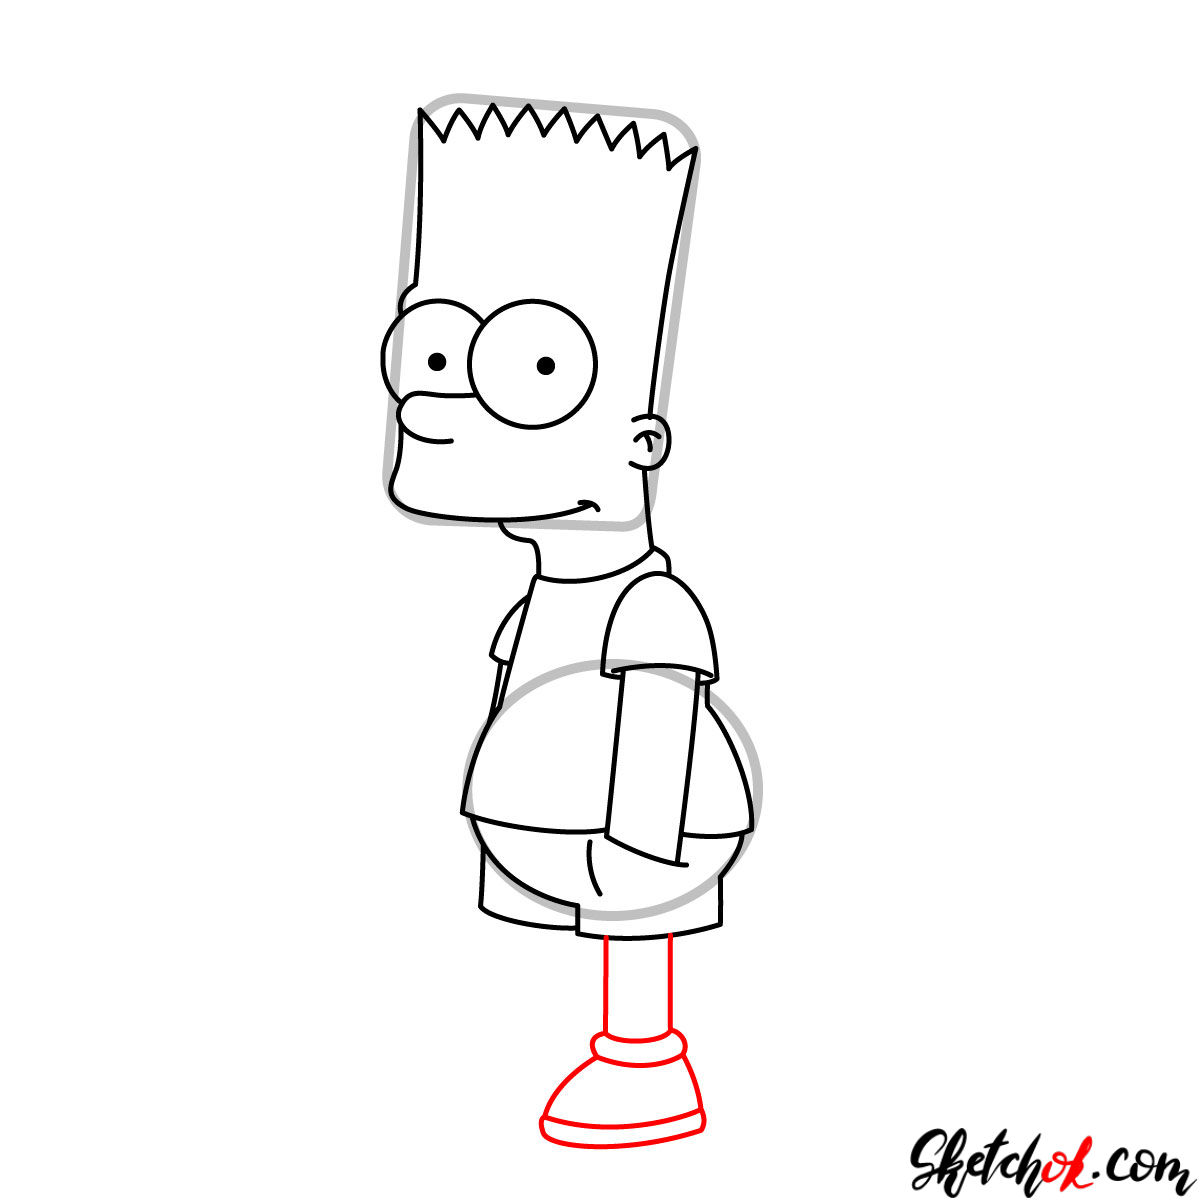 How to draw Bart Simpson - step 08